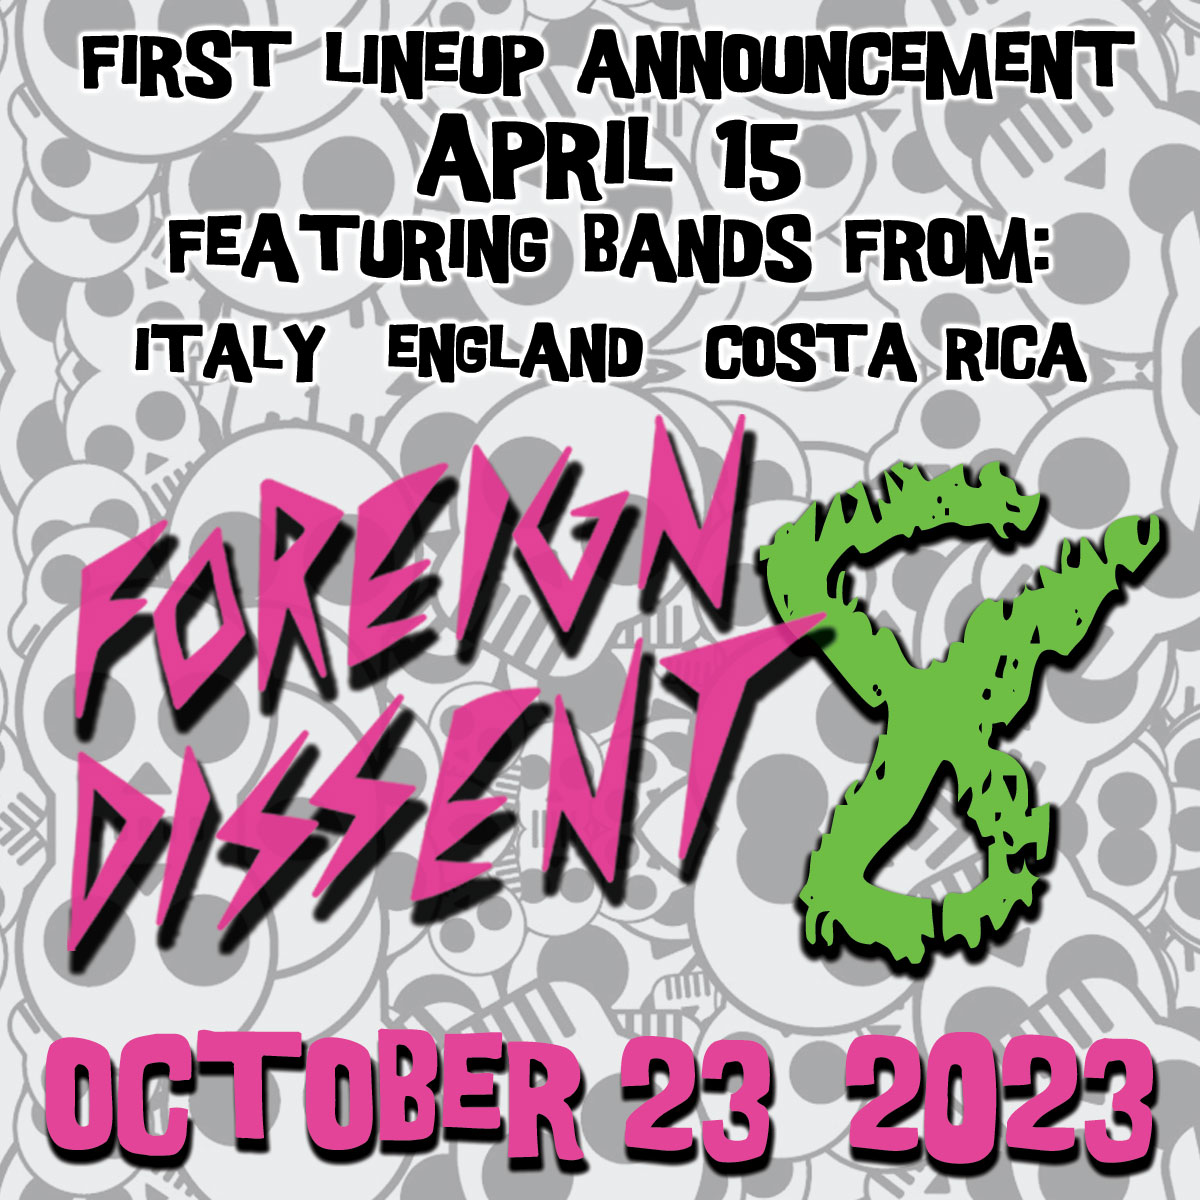 First lineup announcement for Foreign Dissent 8 is April 15, featuring bands from Italy, England, and Costa Rica. Foreign Dissent 8 is October 23, 2023.